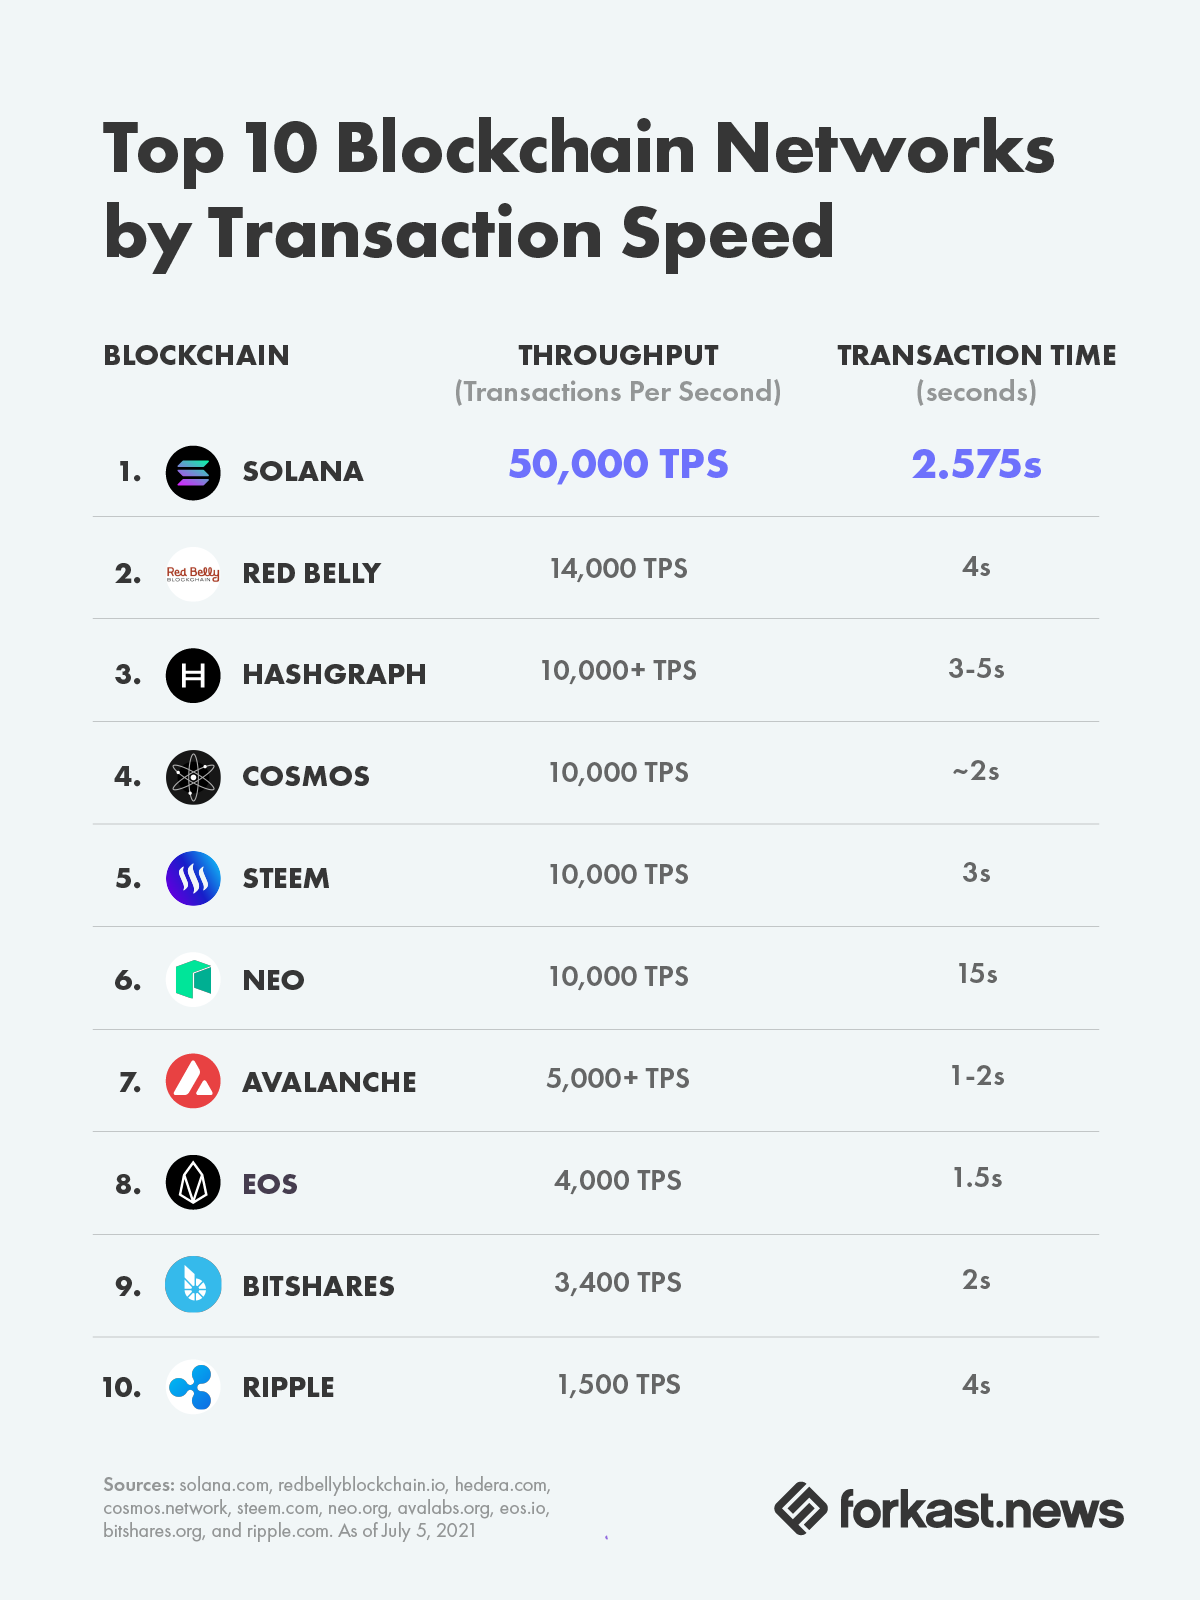 Top 10 blockchain networks by transaction speed. Solana is in the first position with 50000 transactions per seconds and a transaction time of 2.575 seconds.